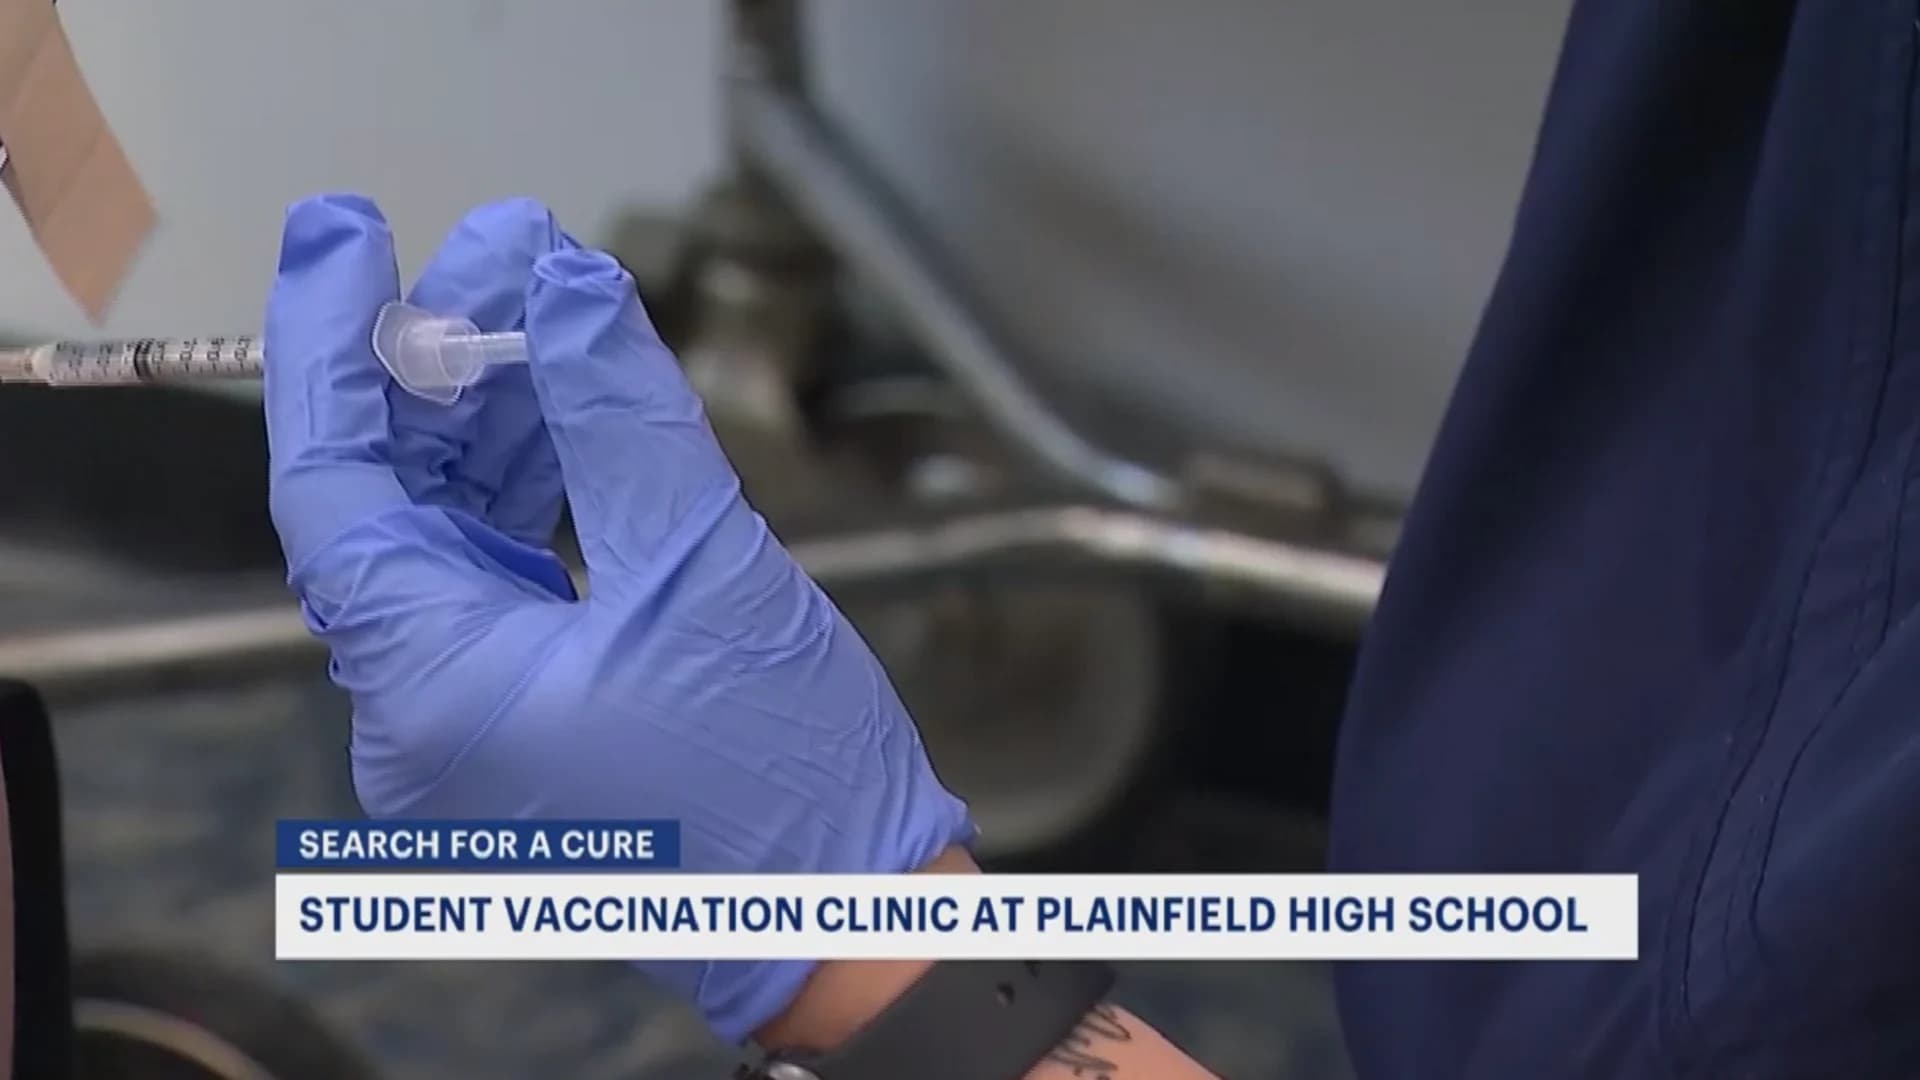 Young people roll up their sleeves at Plainfield High School COVID-19 vaccine clinic